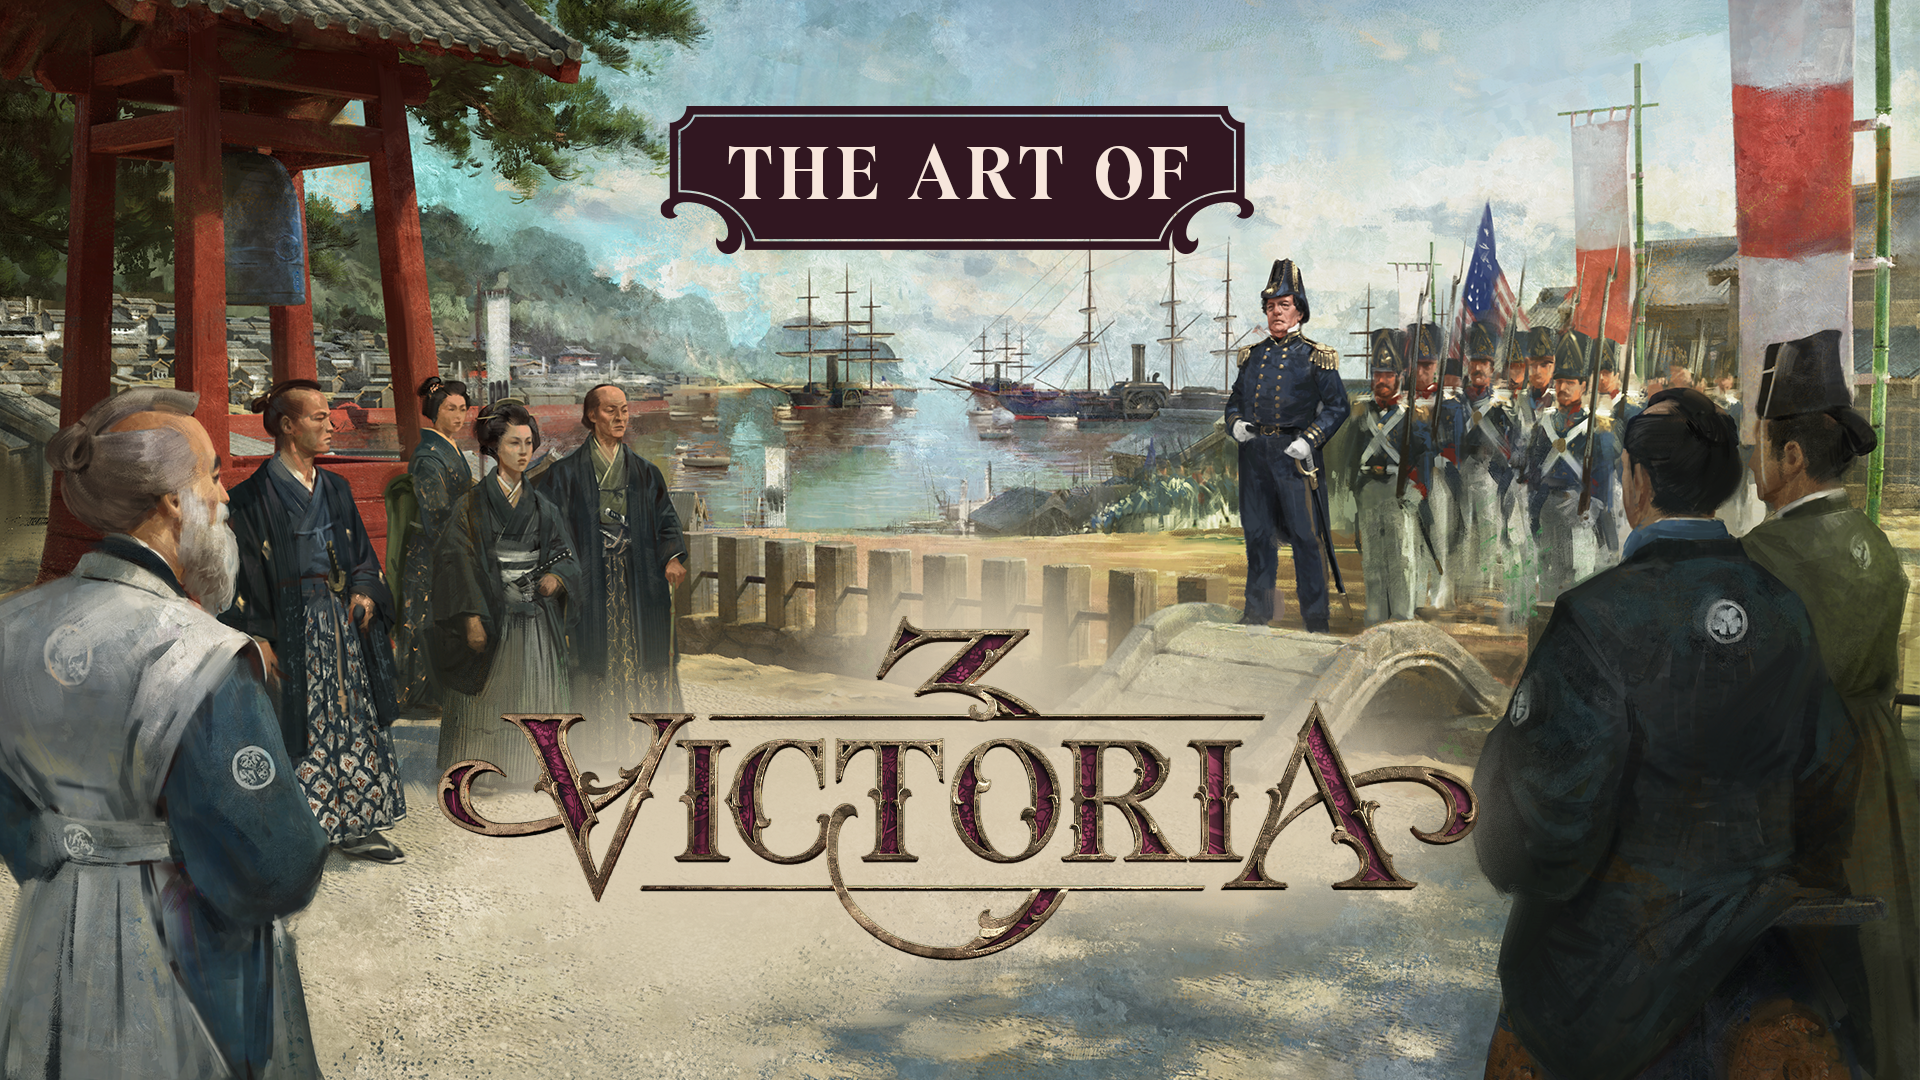 The Art of Victoria Panel. Paradox Interactive Forums